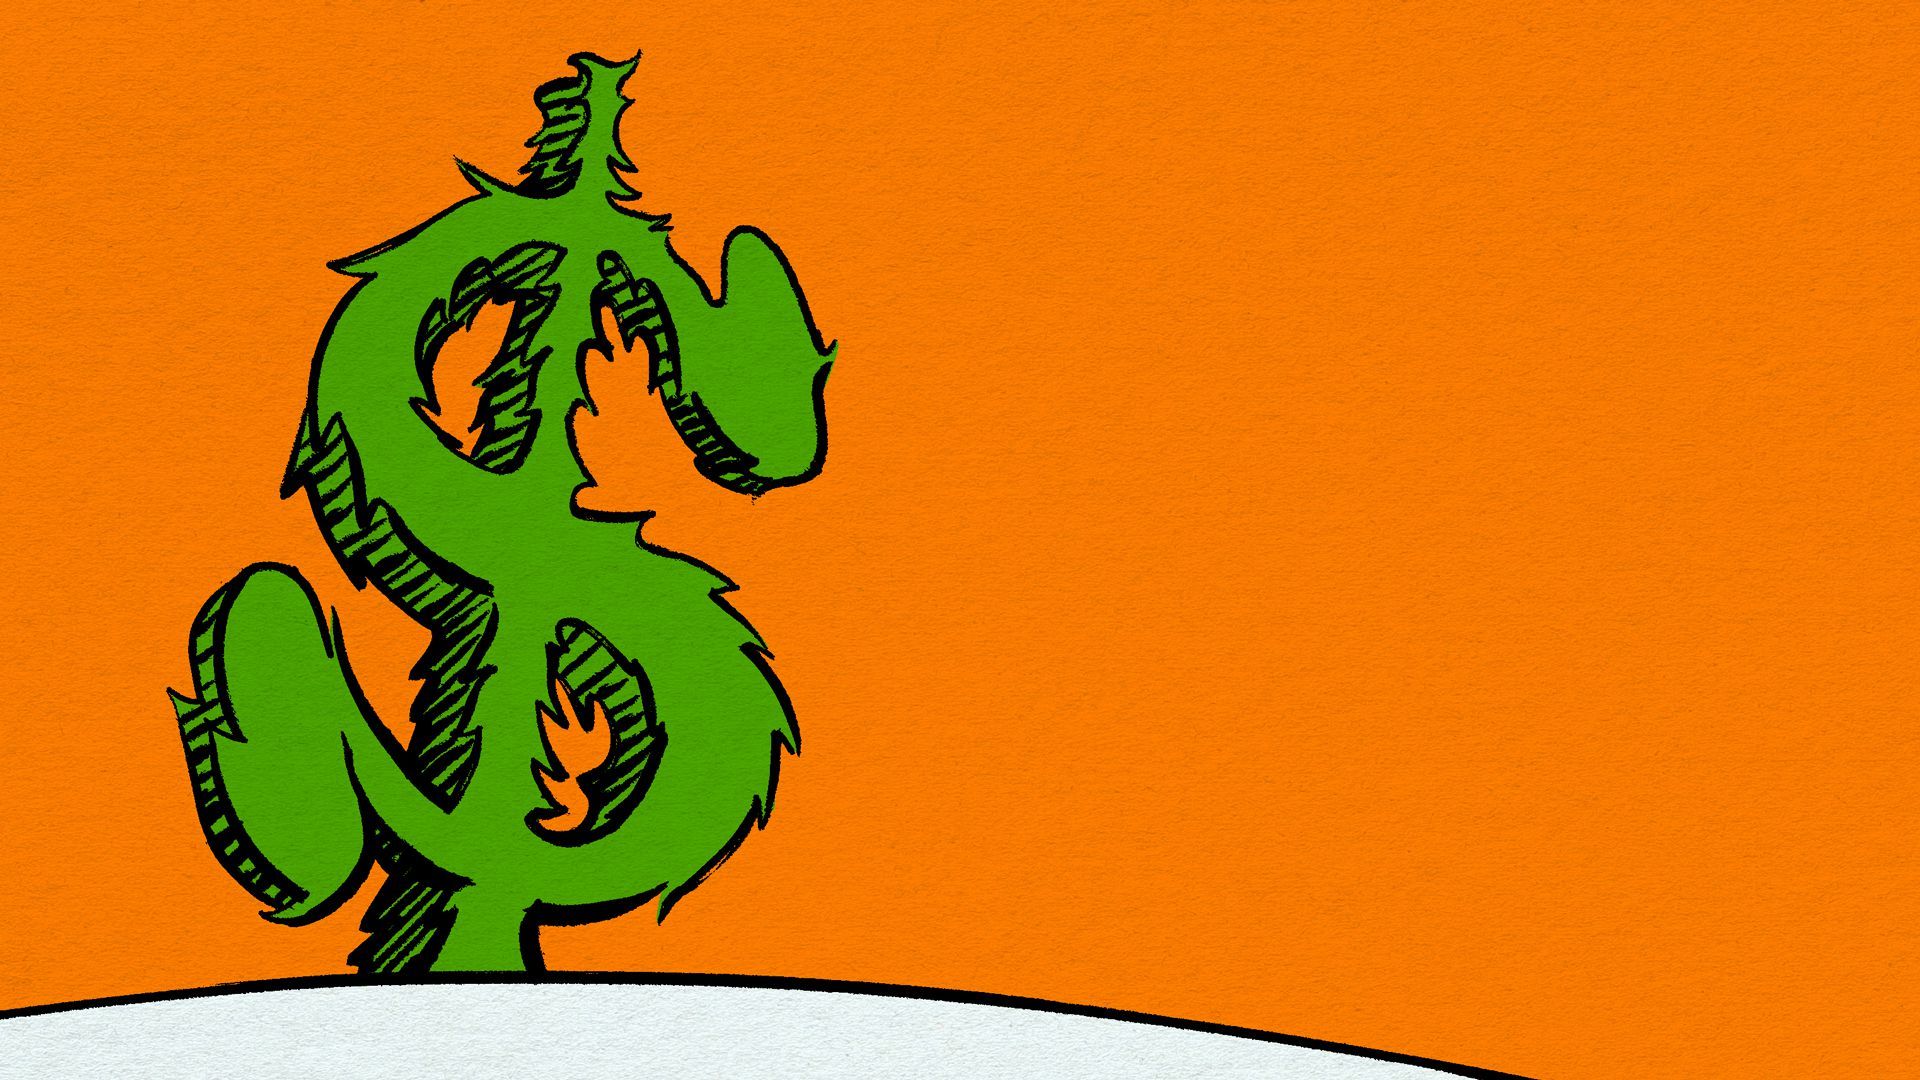 Illustration of a dollar sign drawn in the style of Dr. Seuss. 